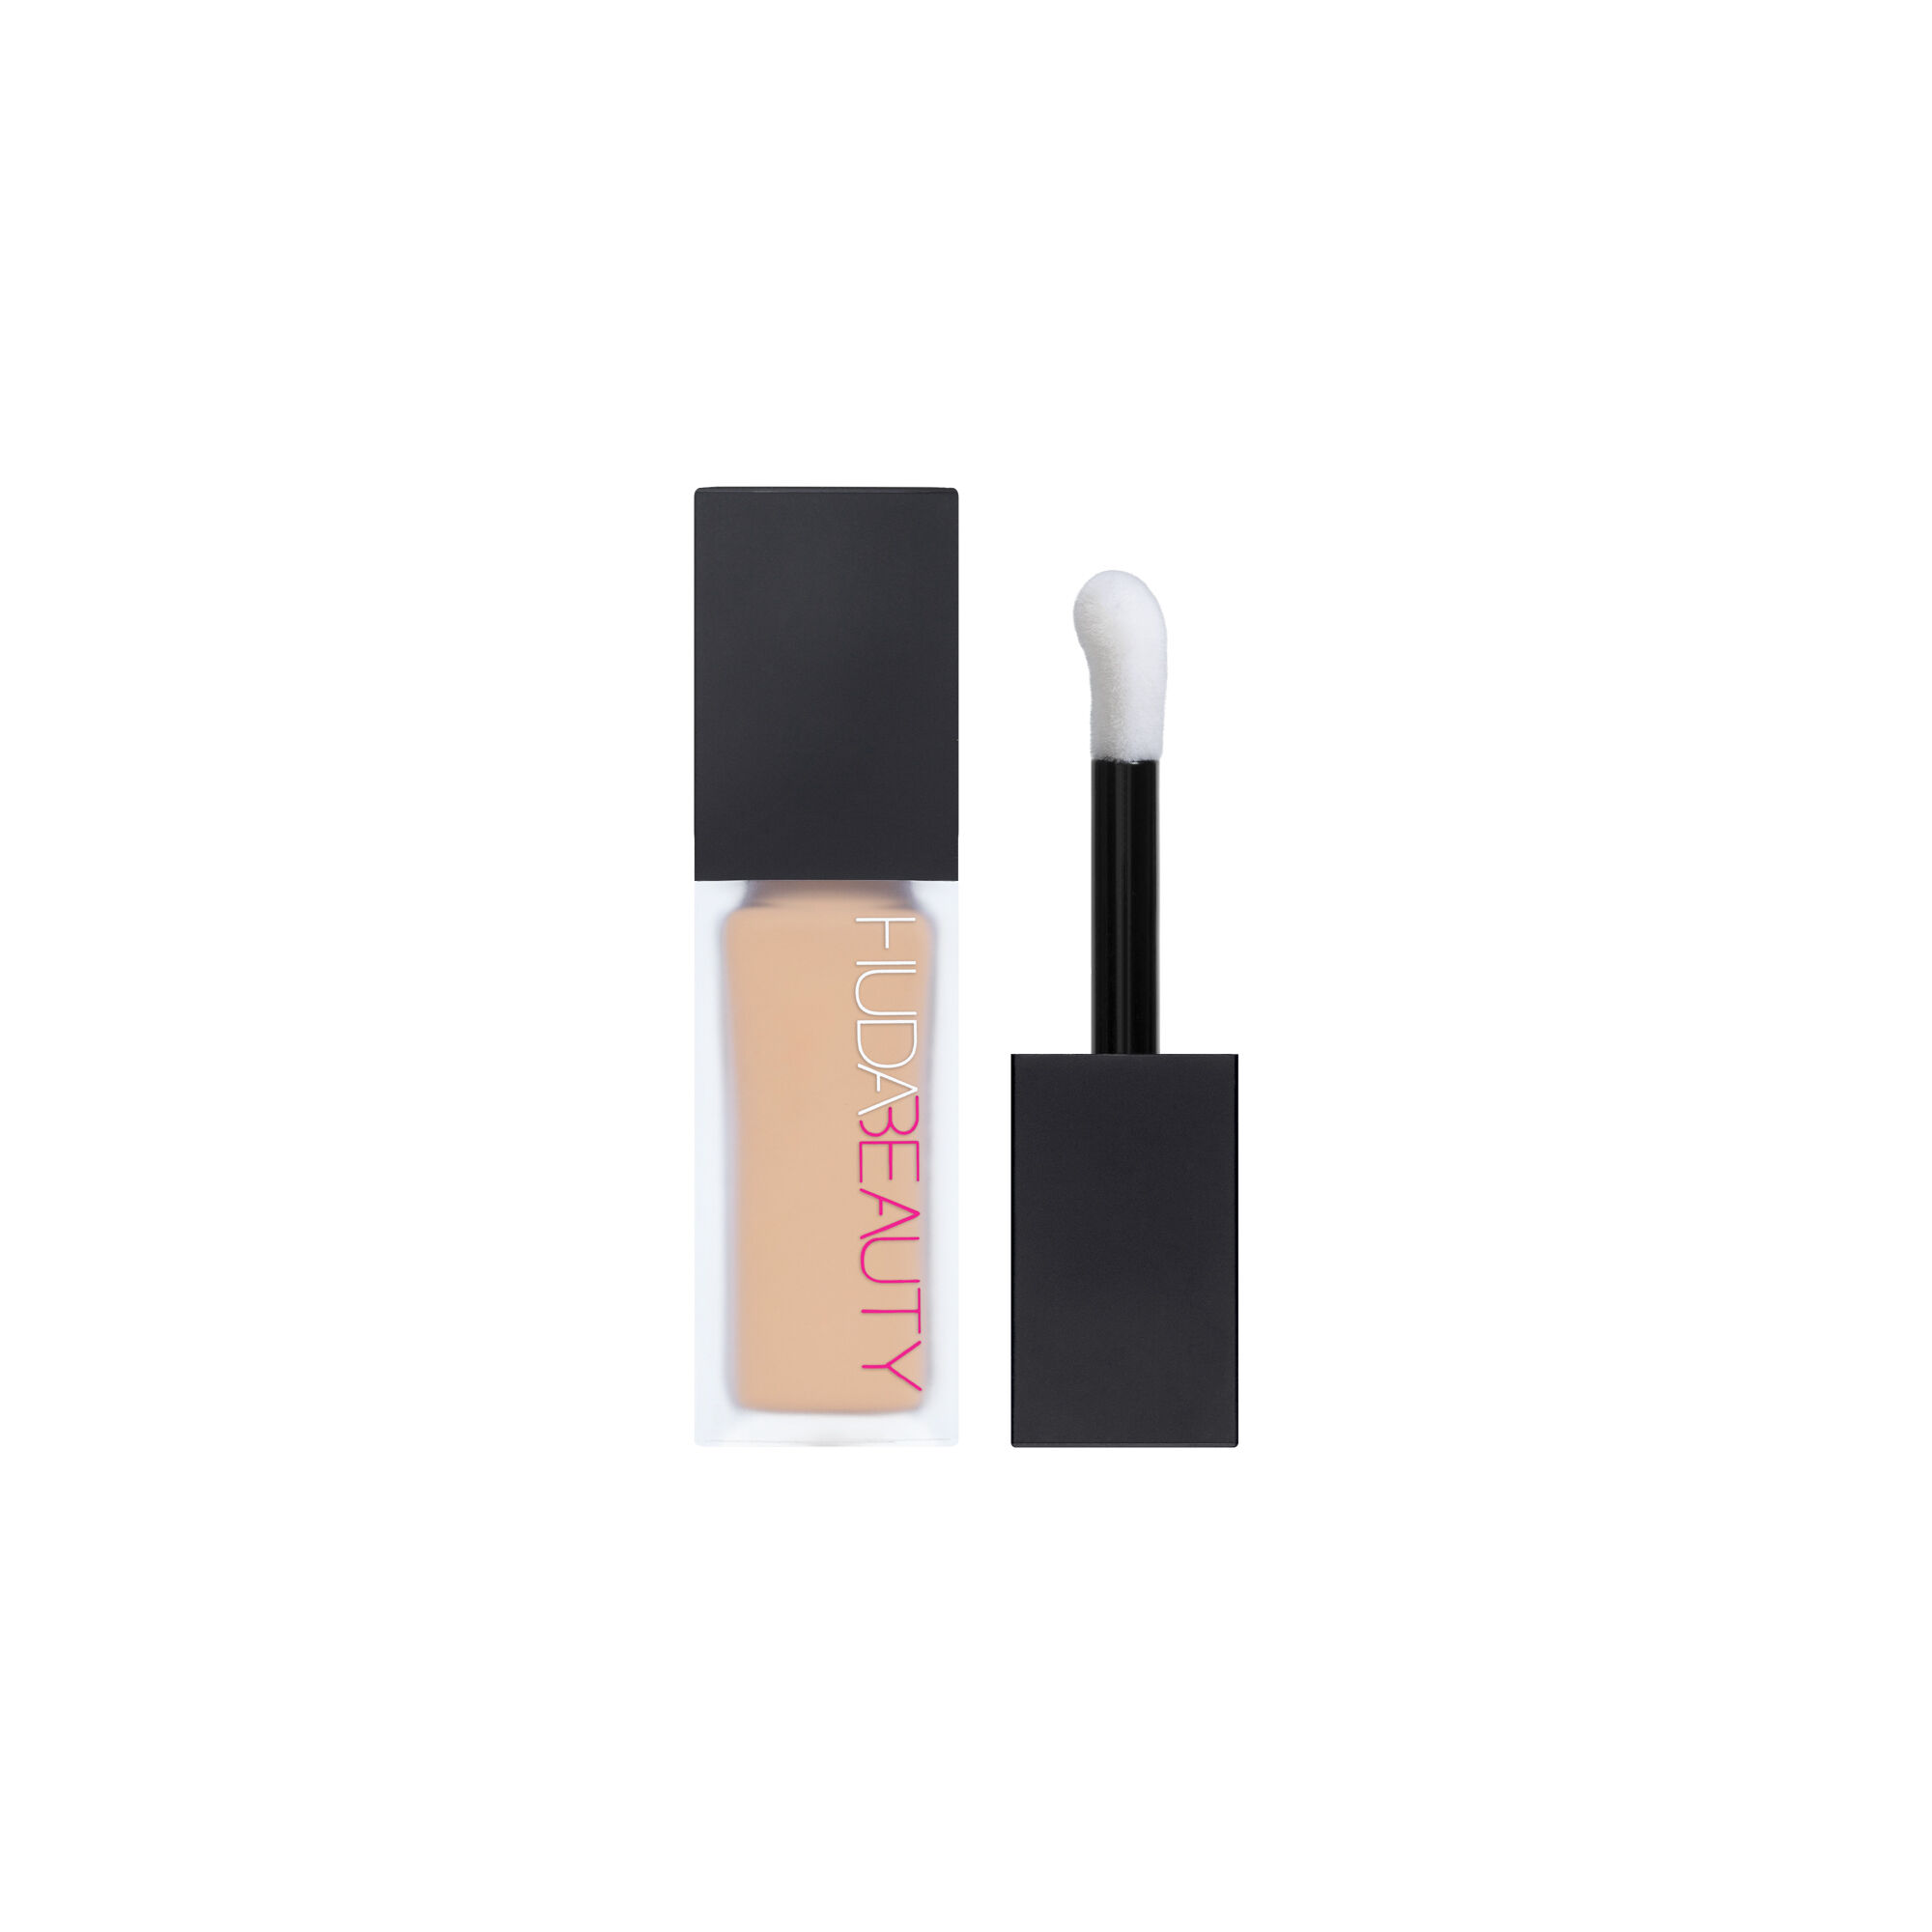 Huda Beauty Faux Filter Concealer Coconut Flakes 2.7 In Coconut Flakes 2.7n